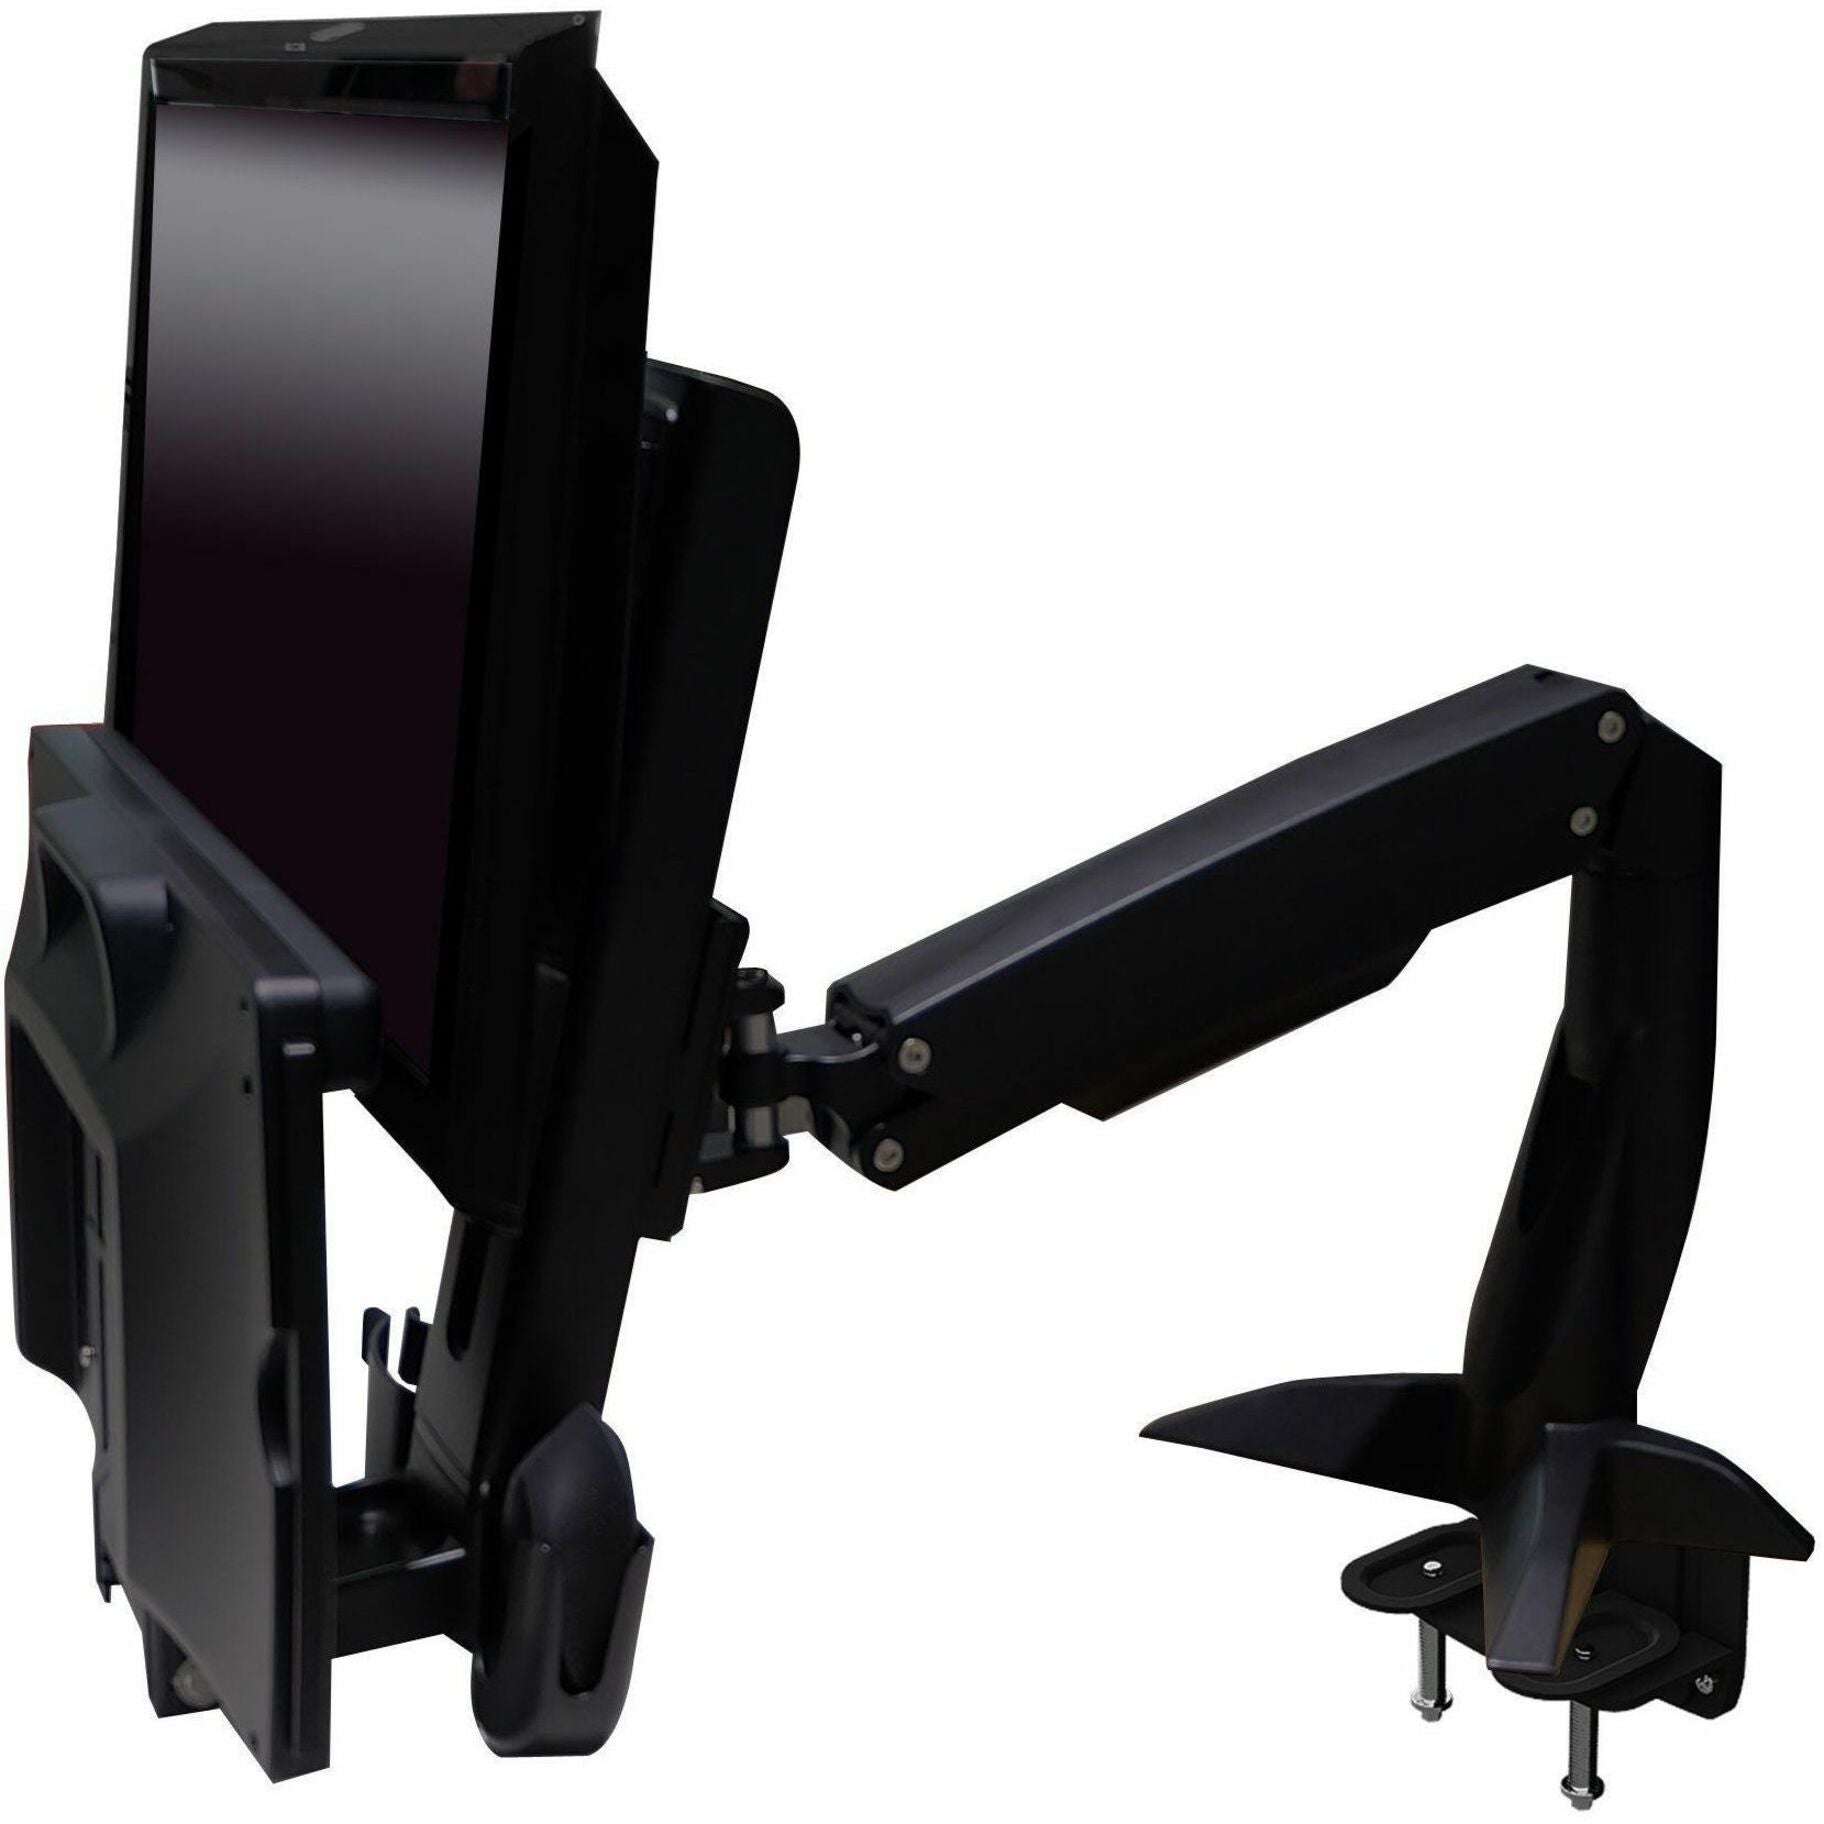 Amer AMR1ACWS Sit-Stand Spring Arm Desk Mount Computer Workstation Combo System, Foldable Keyboard Tray, Retractable Mouse Pad, 24" Monitor Support